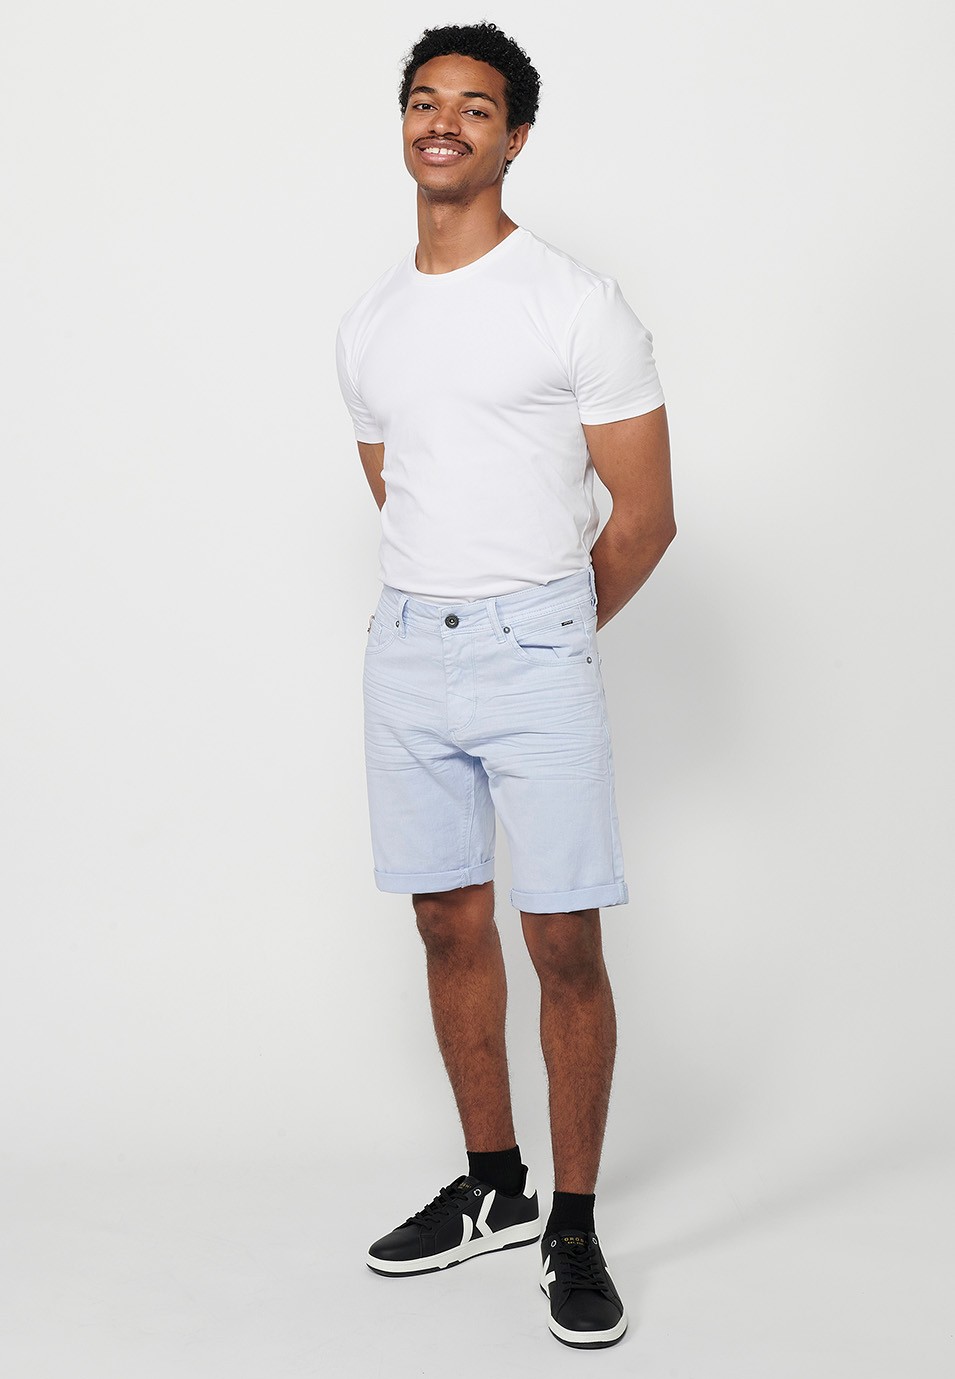 Denim Bermuda shorts with cuffed finish and front zipper and button closure. Five pockets, one blue color pocket for men